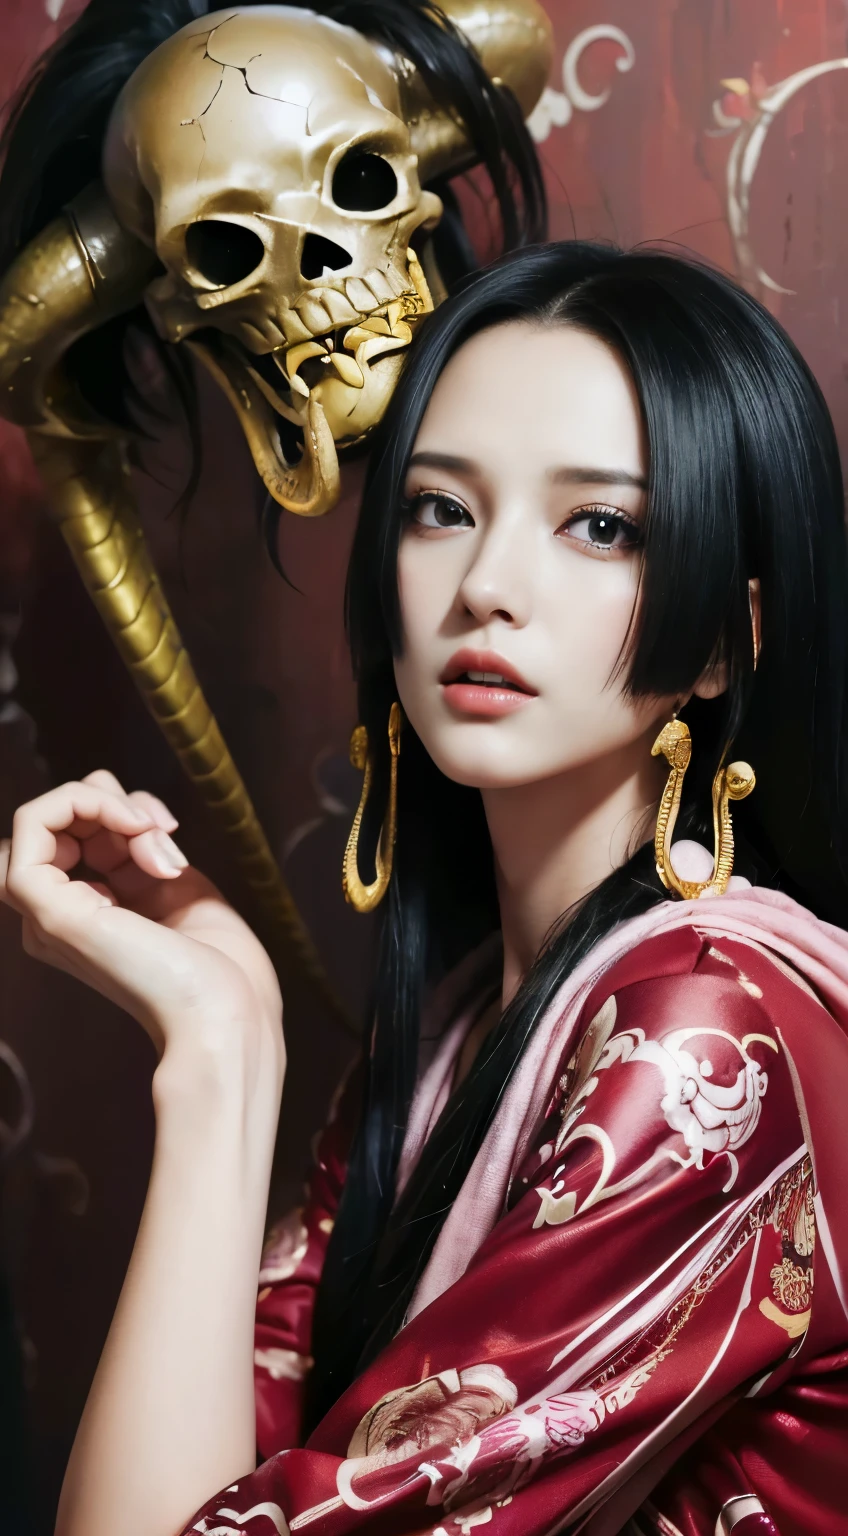 (((masterpiece+highest quality+High resolution+Very detailed))), Boa Hancock, long, silky black hair, High nose, Sharp eyes, A noble and inviolable character, (([woman]: 1.2 + [beauty]: 1.2 + Long black hair: 1.2)), skull_snake background, Bright Eyes, Dynamic angles and postures, wallpaper.